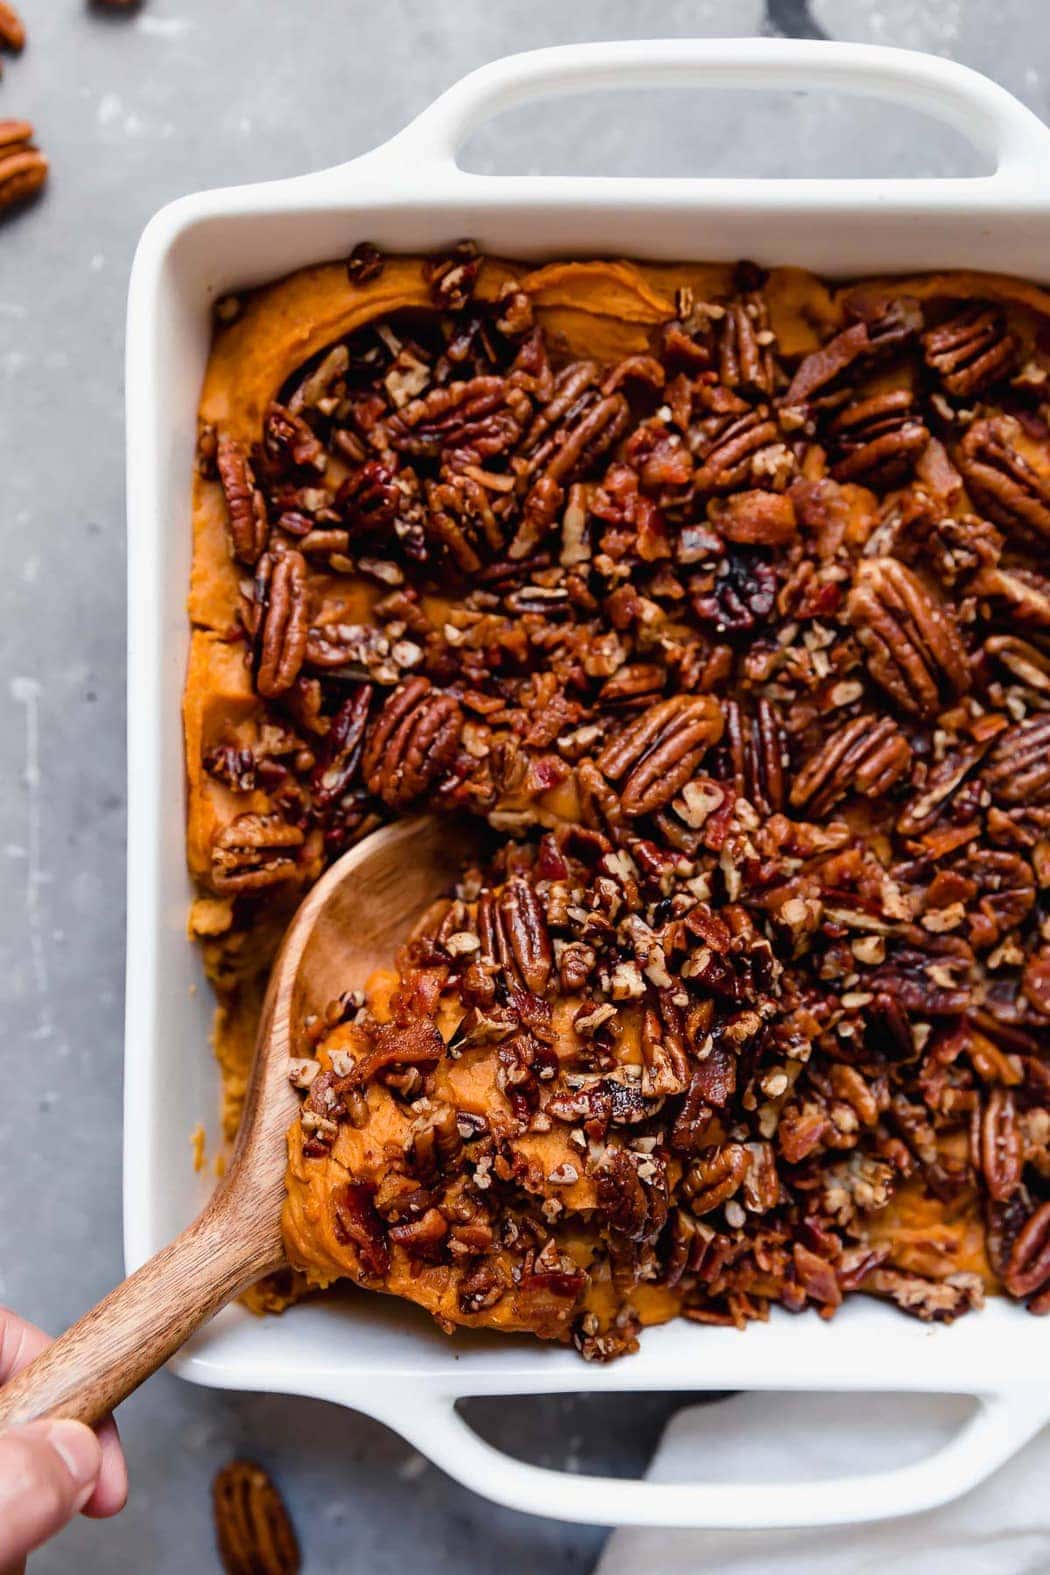 Overhead image of a sweet potato casserole with pecan topping